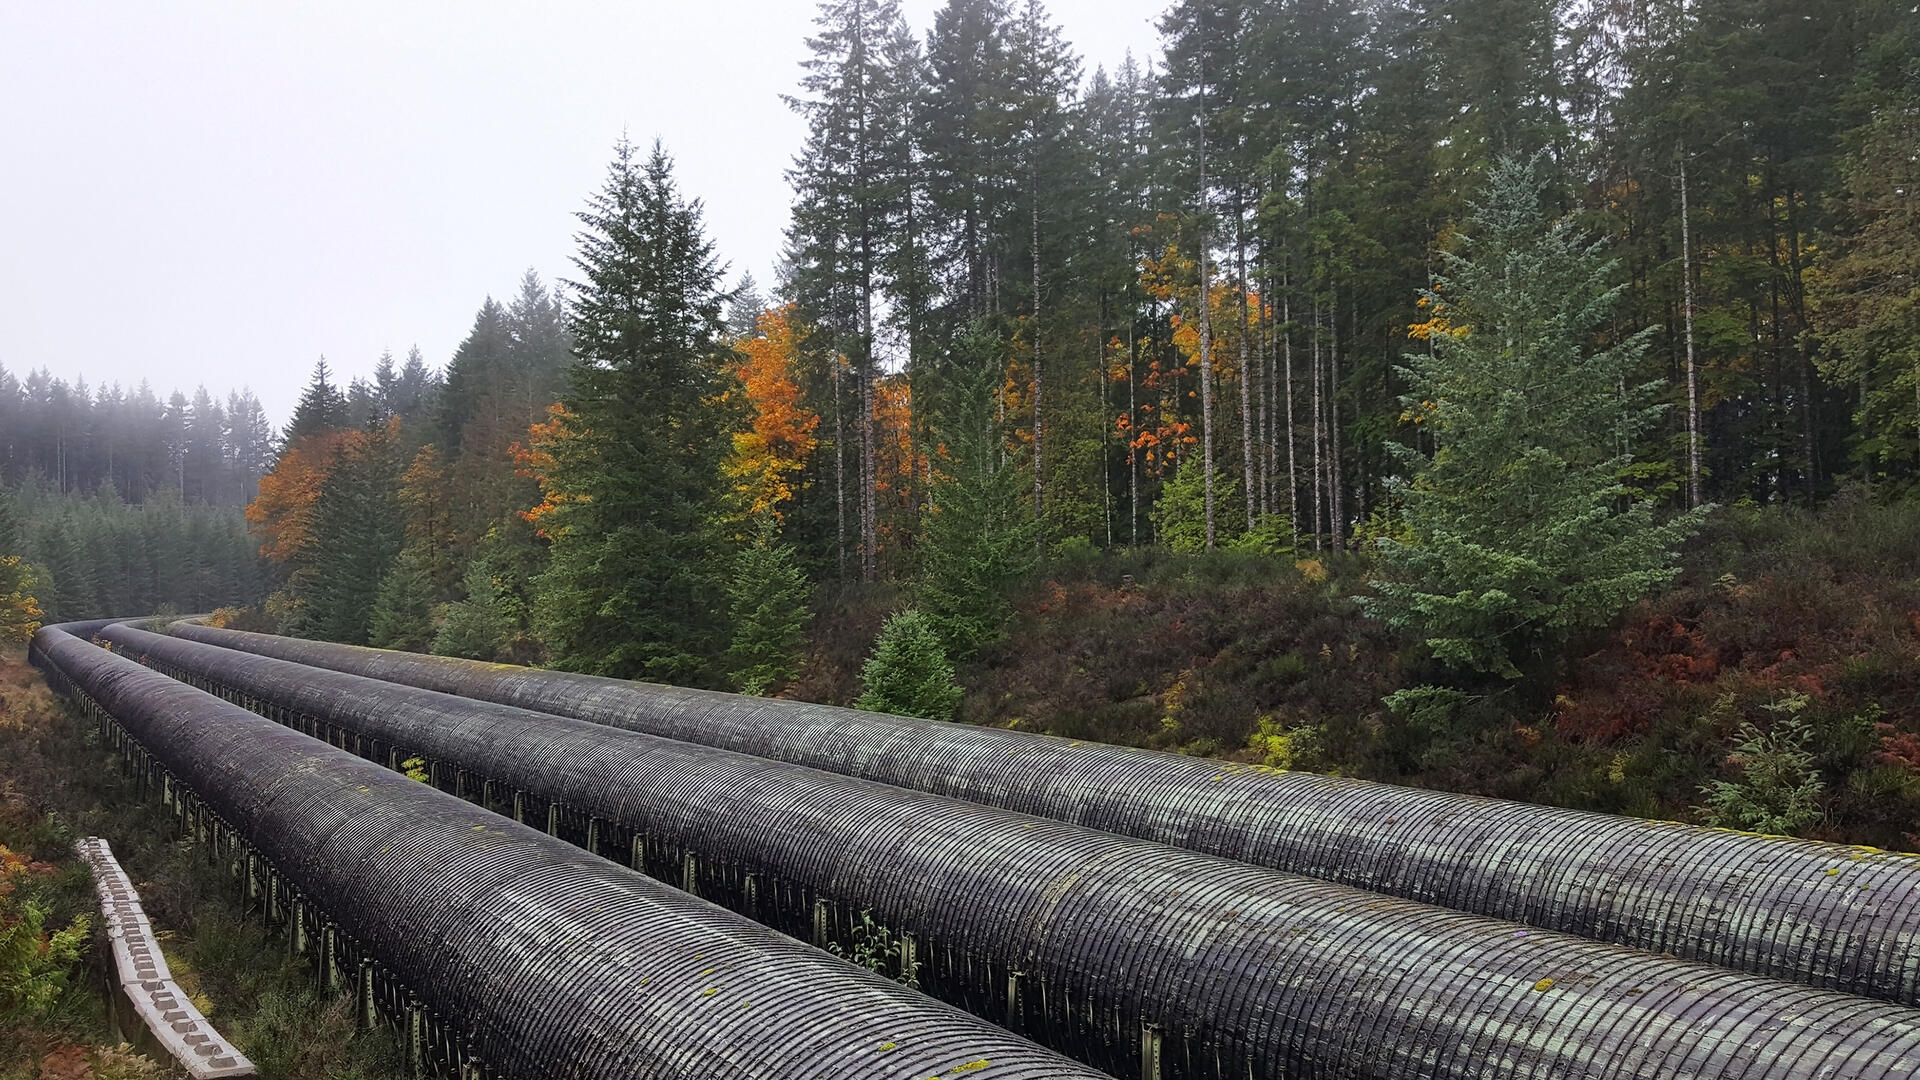 A pipeline runs beside a forest on Vancouver Island, Canada